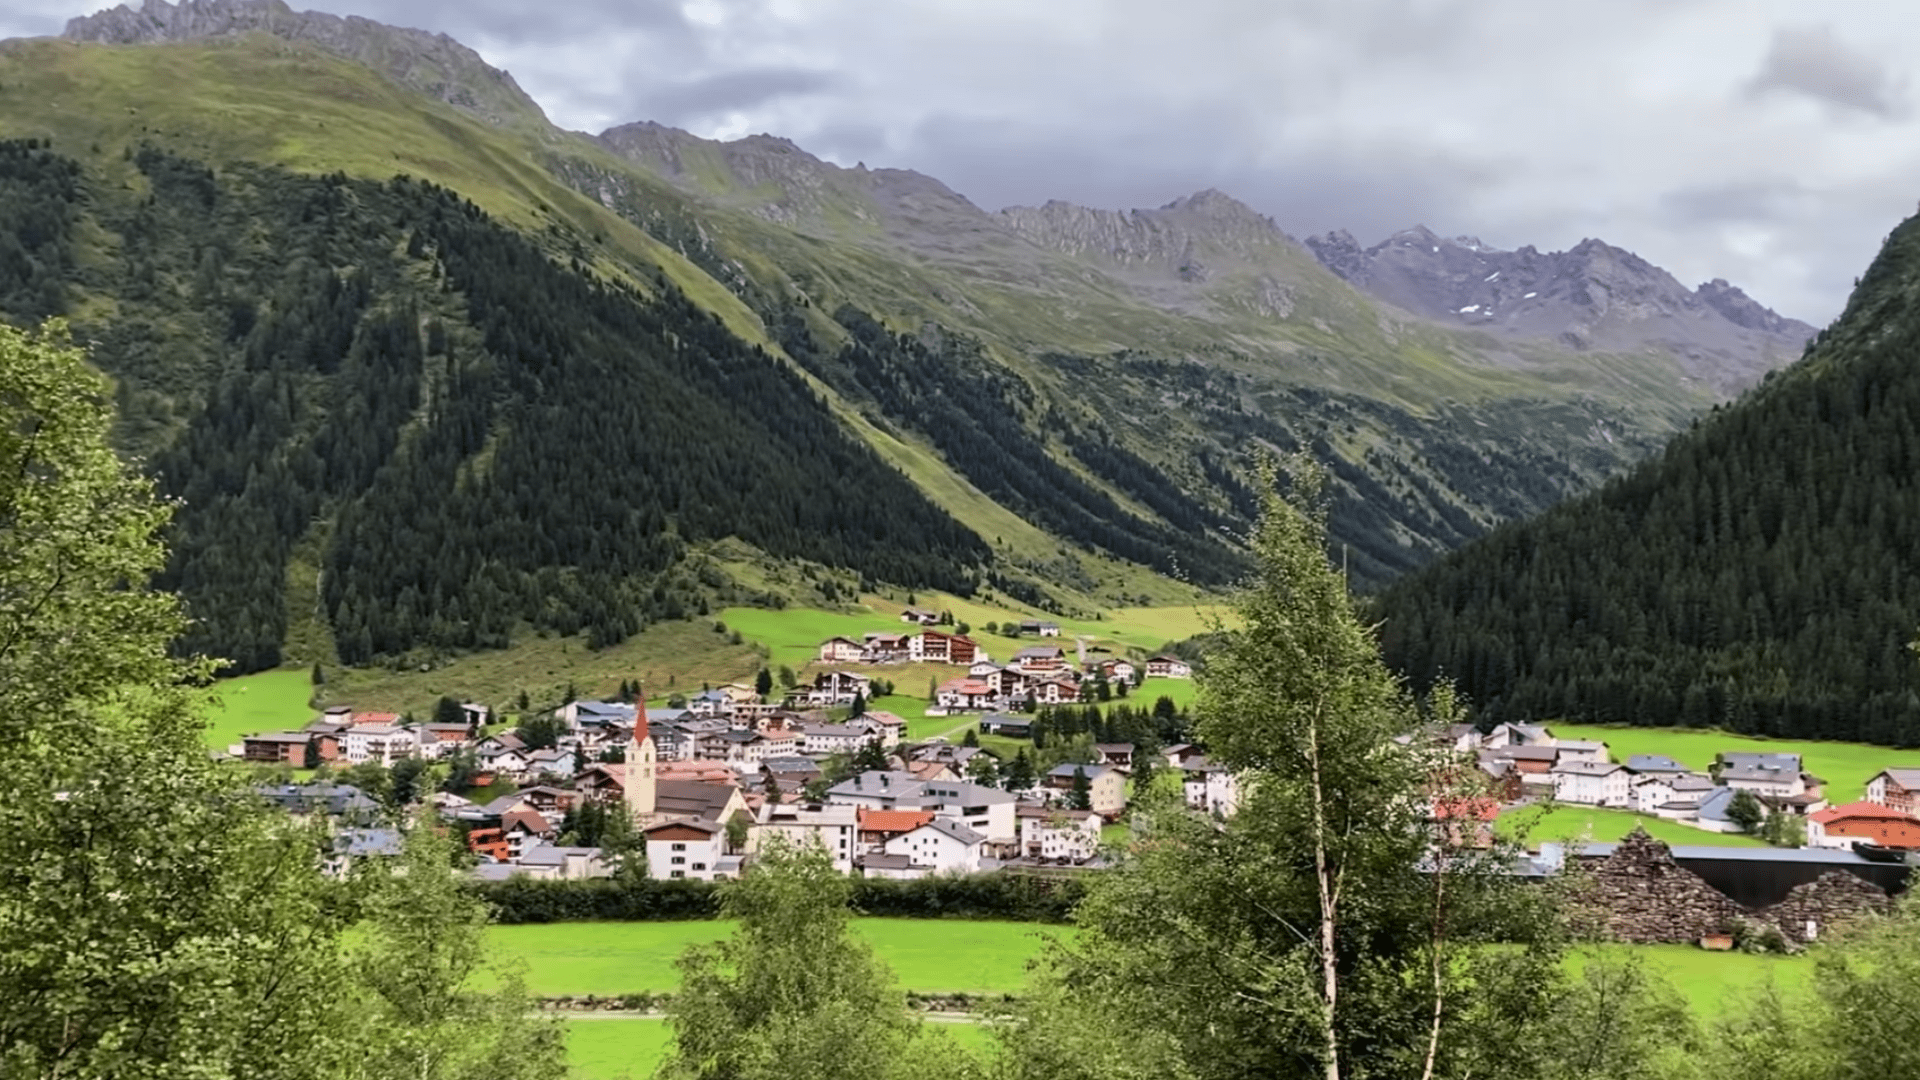 Our Vacation to Galtür, Austria + the Tyrolean Alps | My Merry Messy German Life